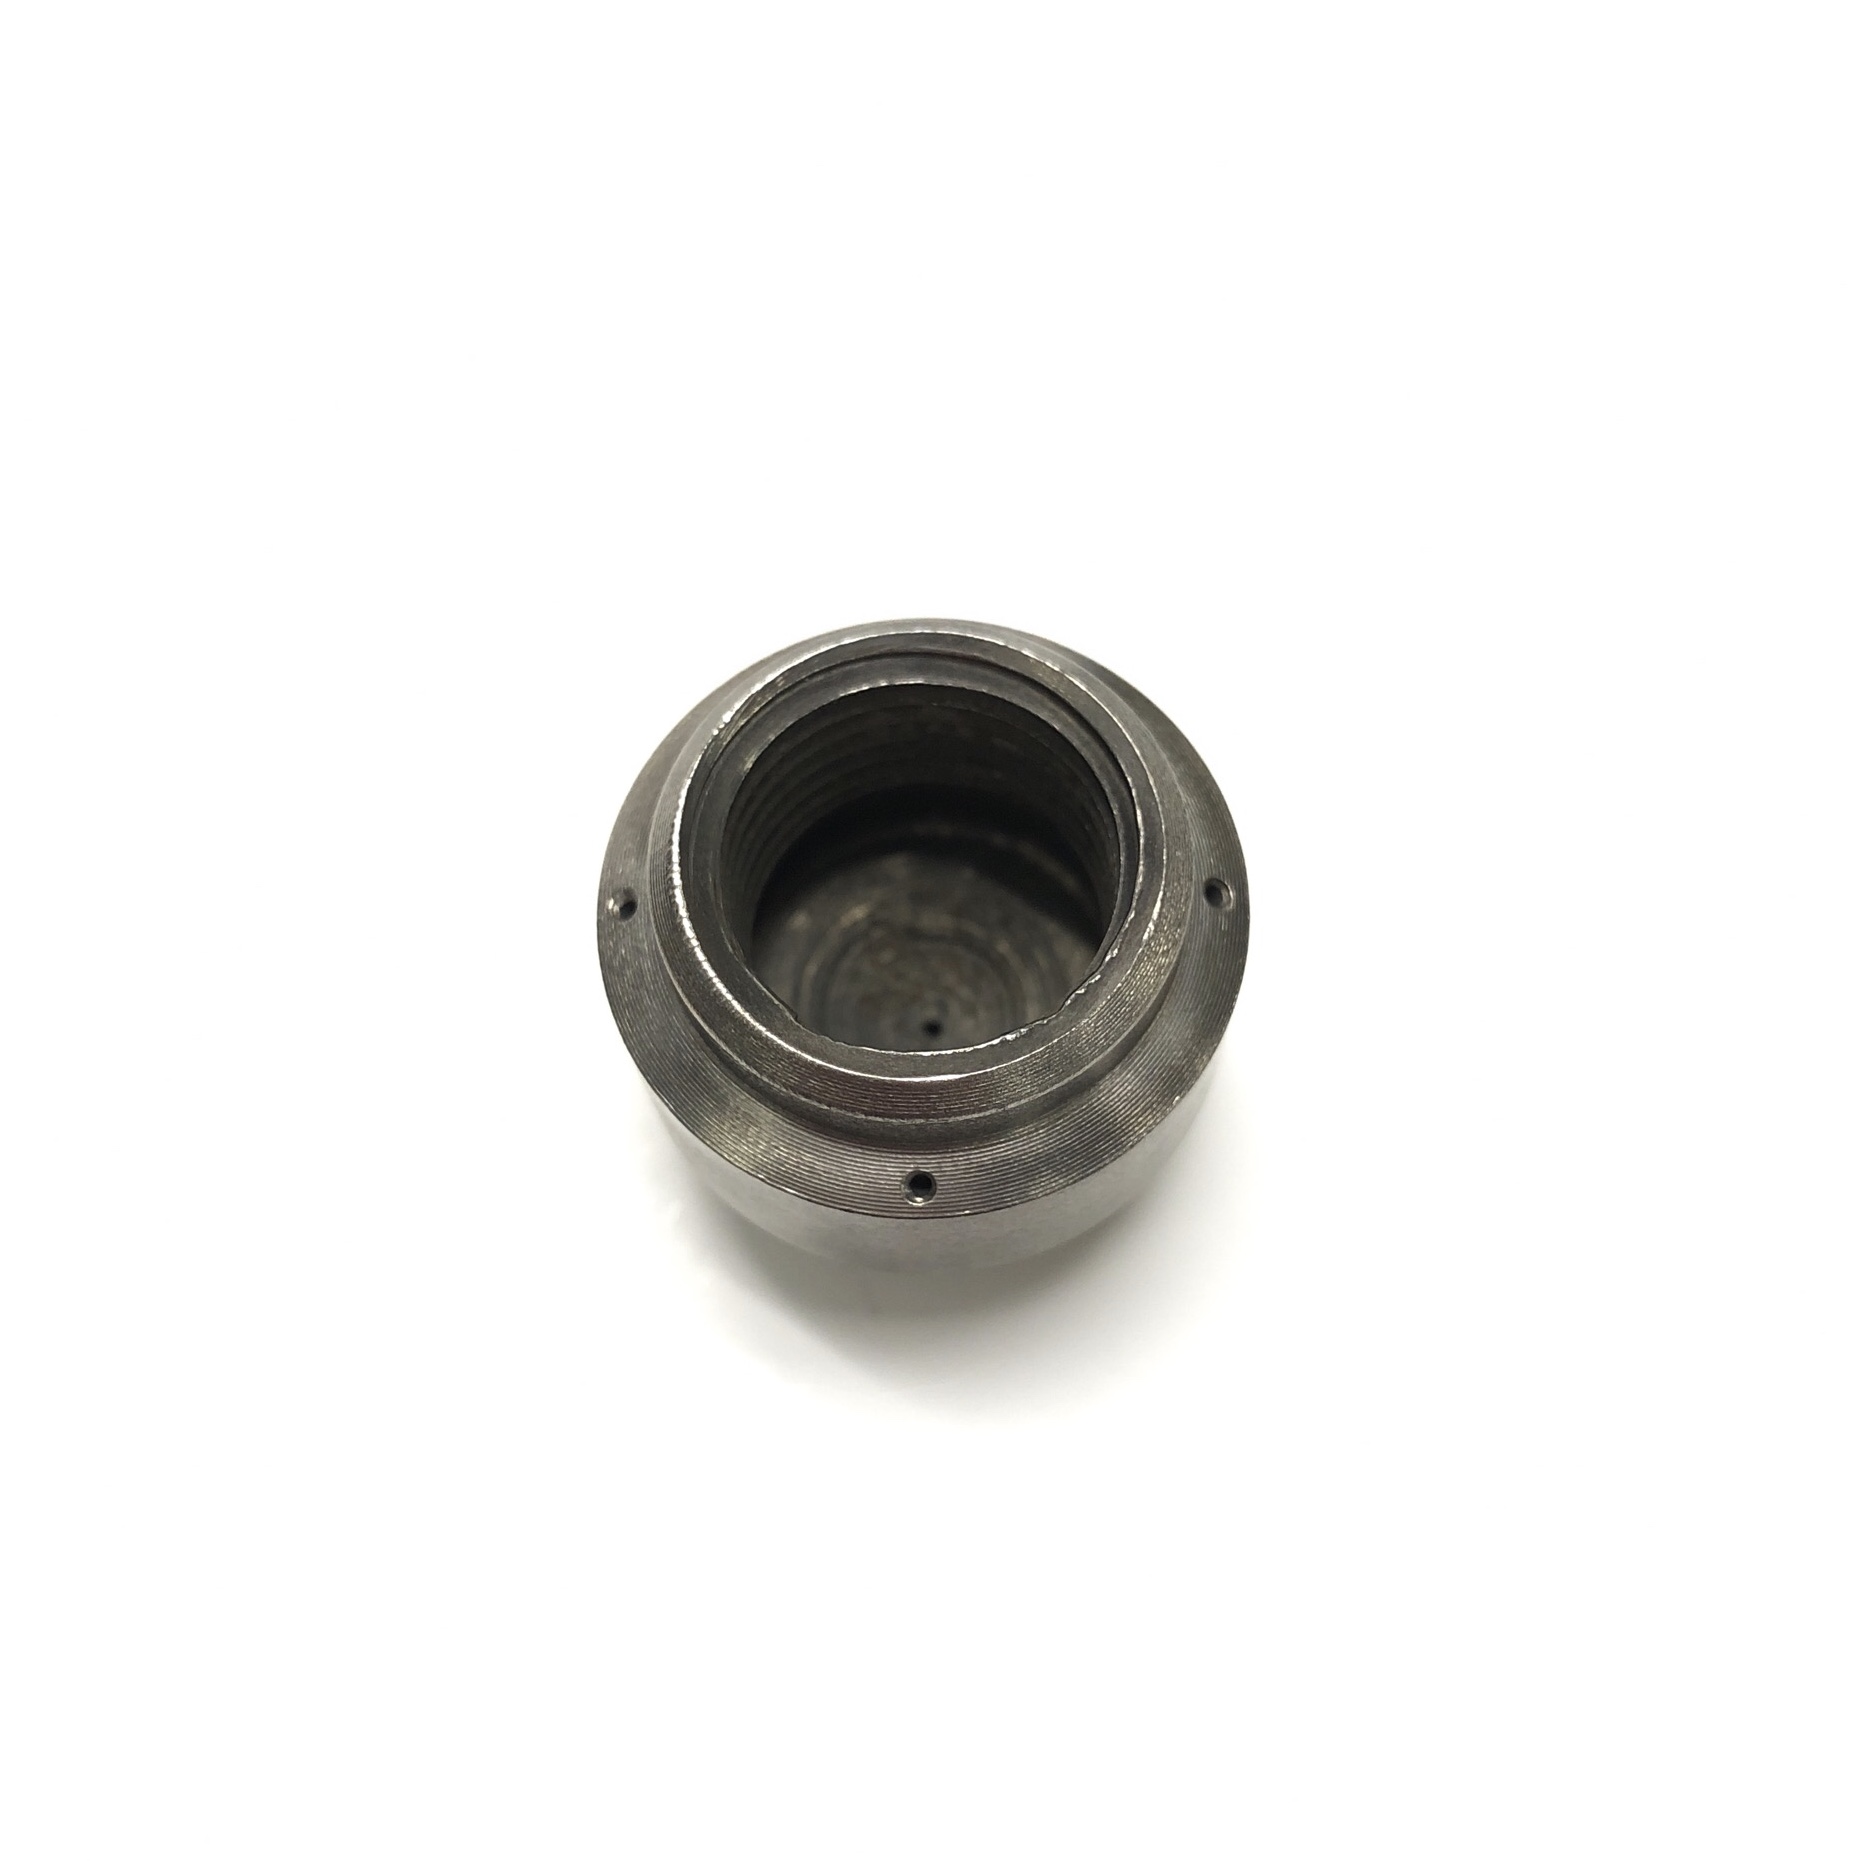 3/8" Ball Nozzle Back View